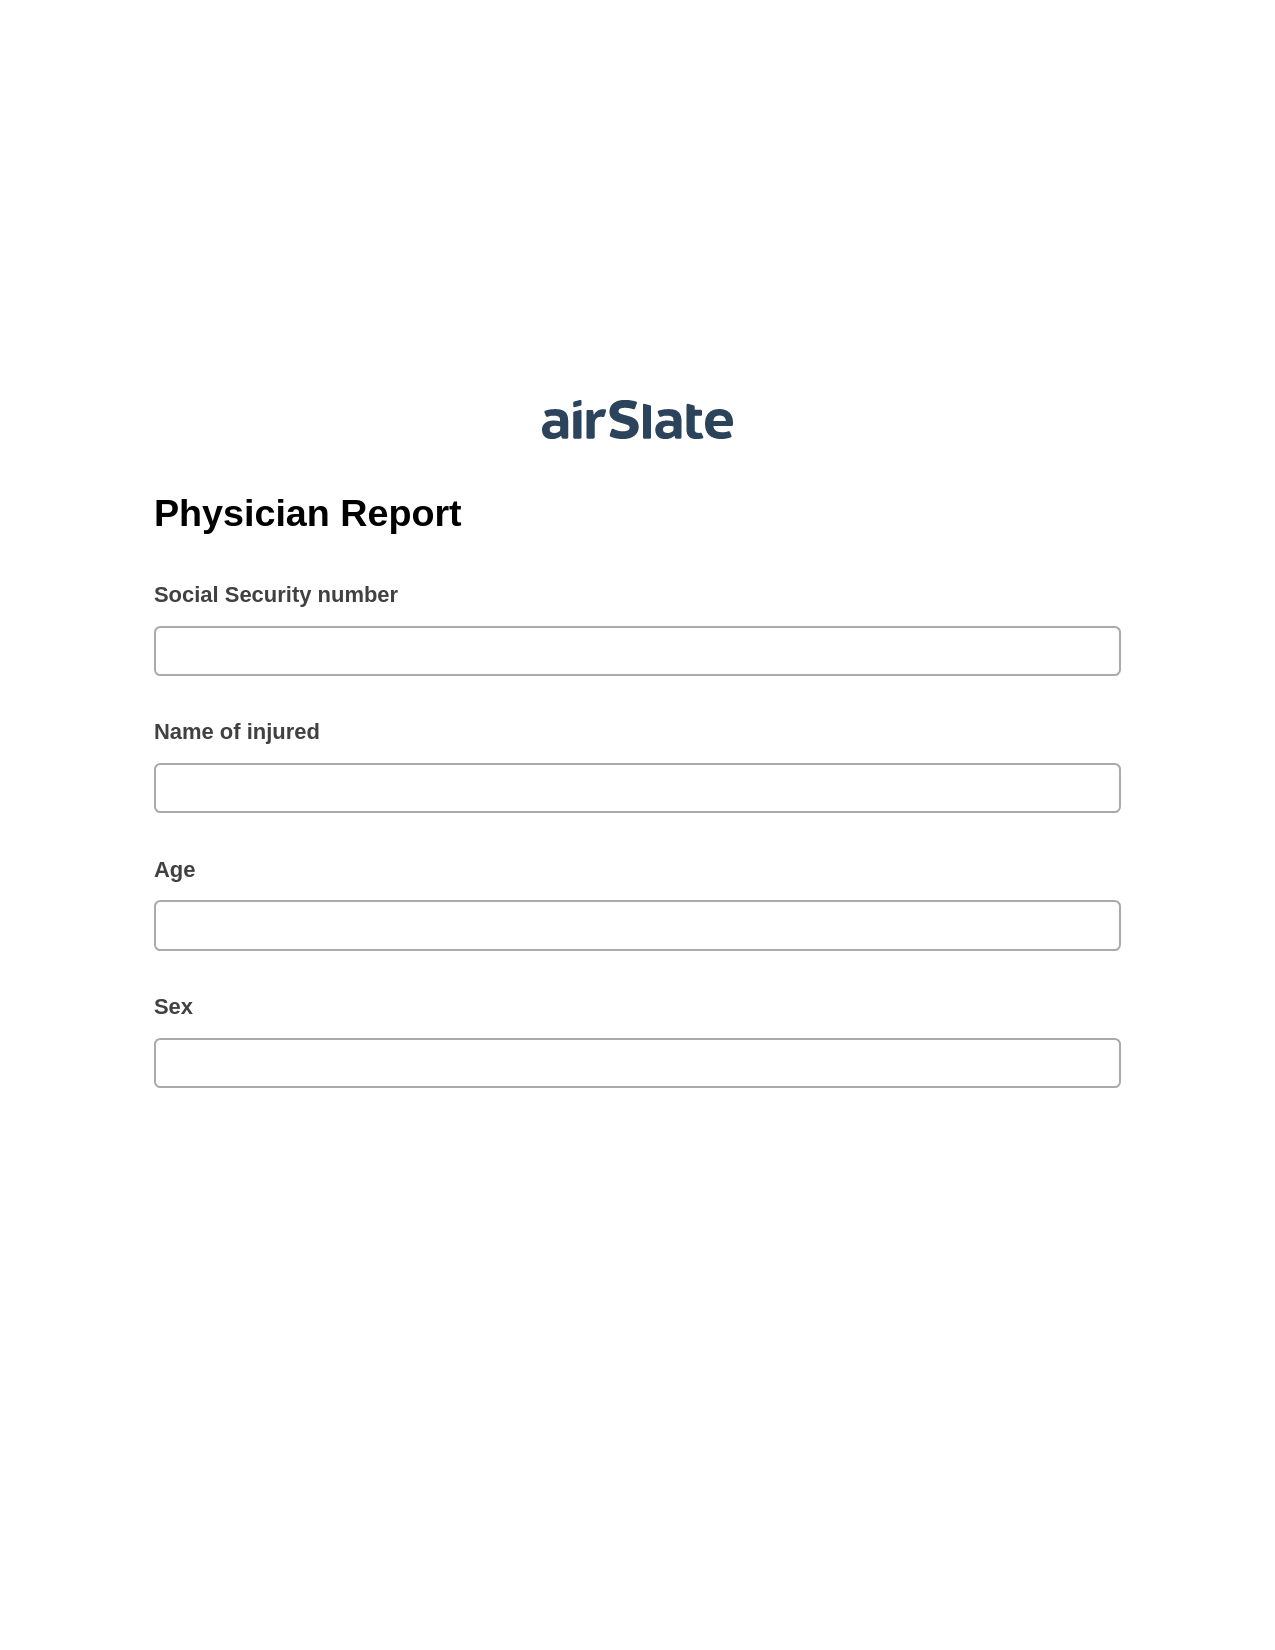 Physician Report Pre-fill Dropdowns from Office 365 Excel Bot, Invoke Salesforce Process Bot, Export to Excel 365 Bot